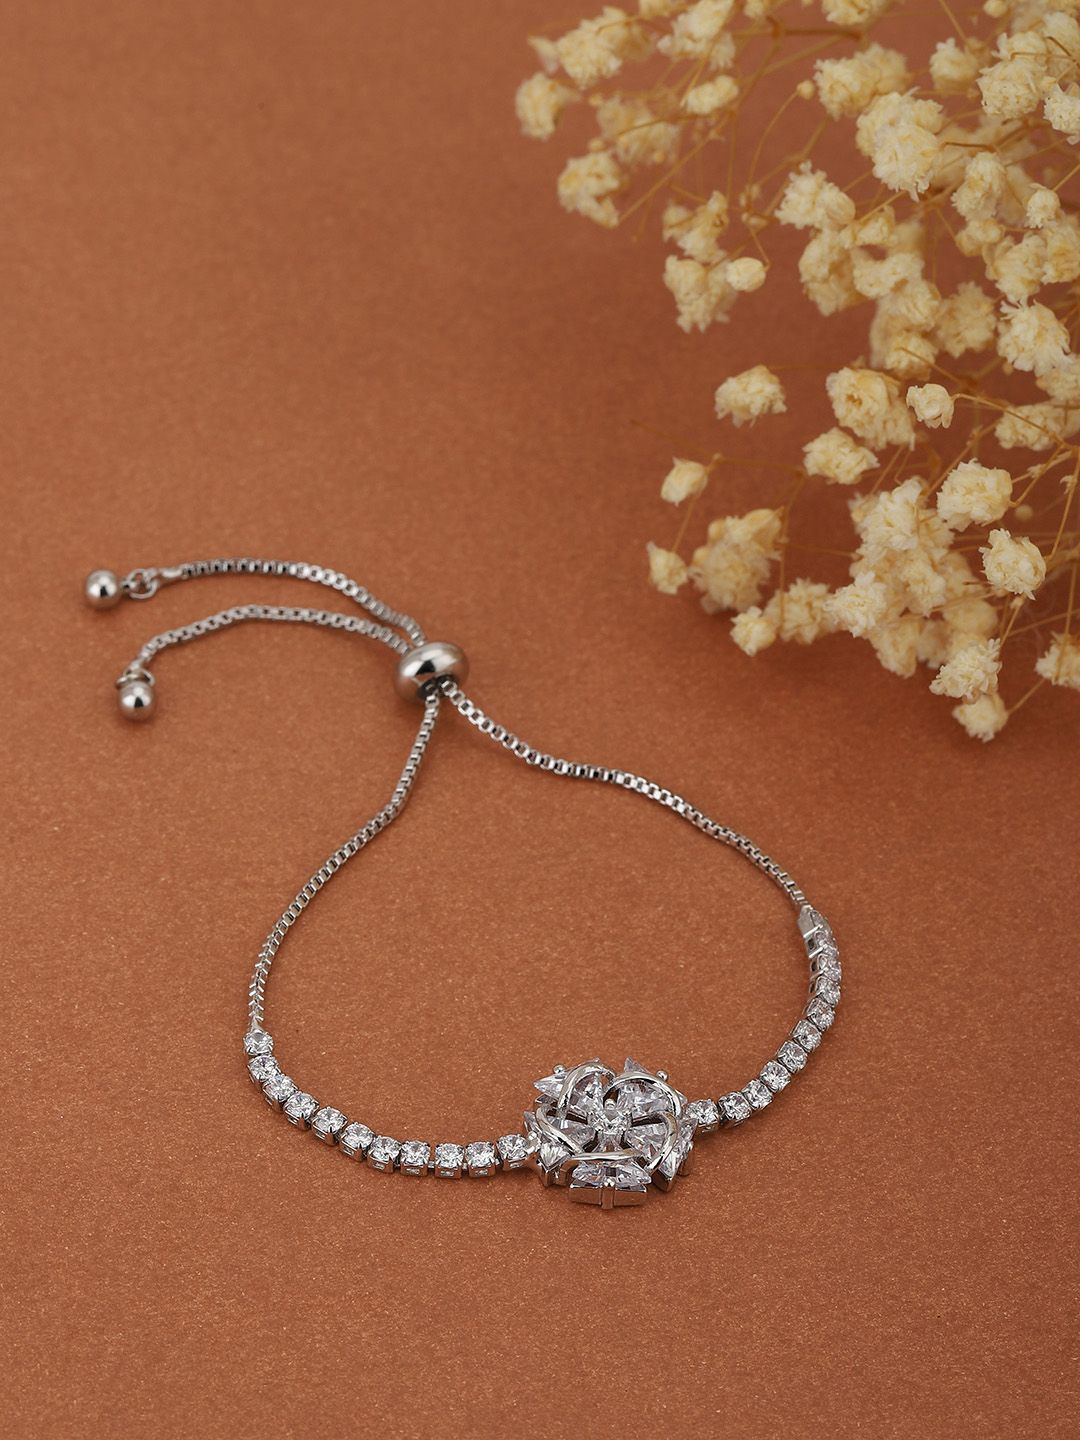 Carlton London Women Silver-Toned Rhodium-Plated Cubic Zirconia Handcrafted Bracelet Price in India